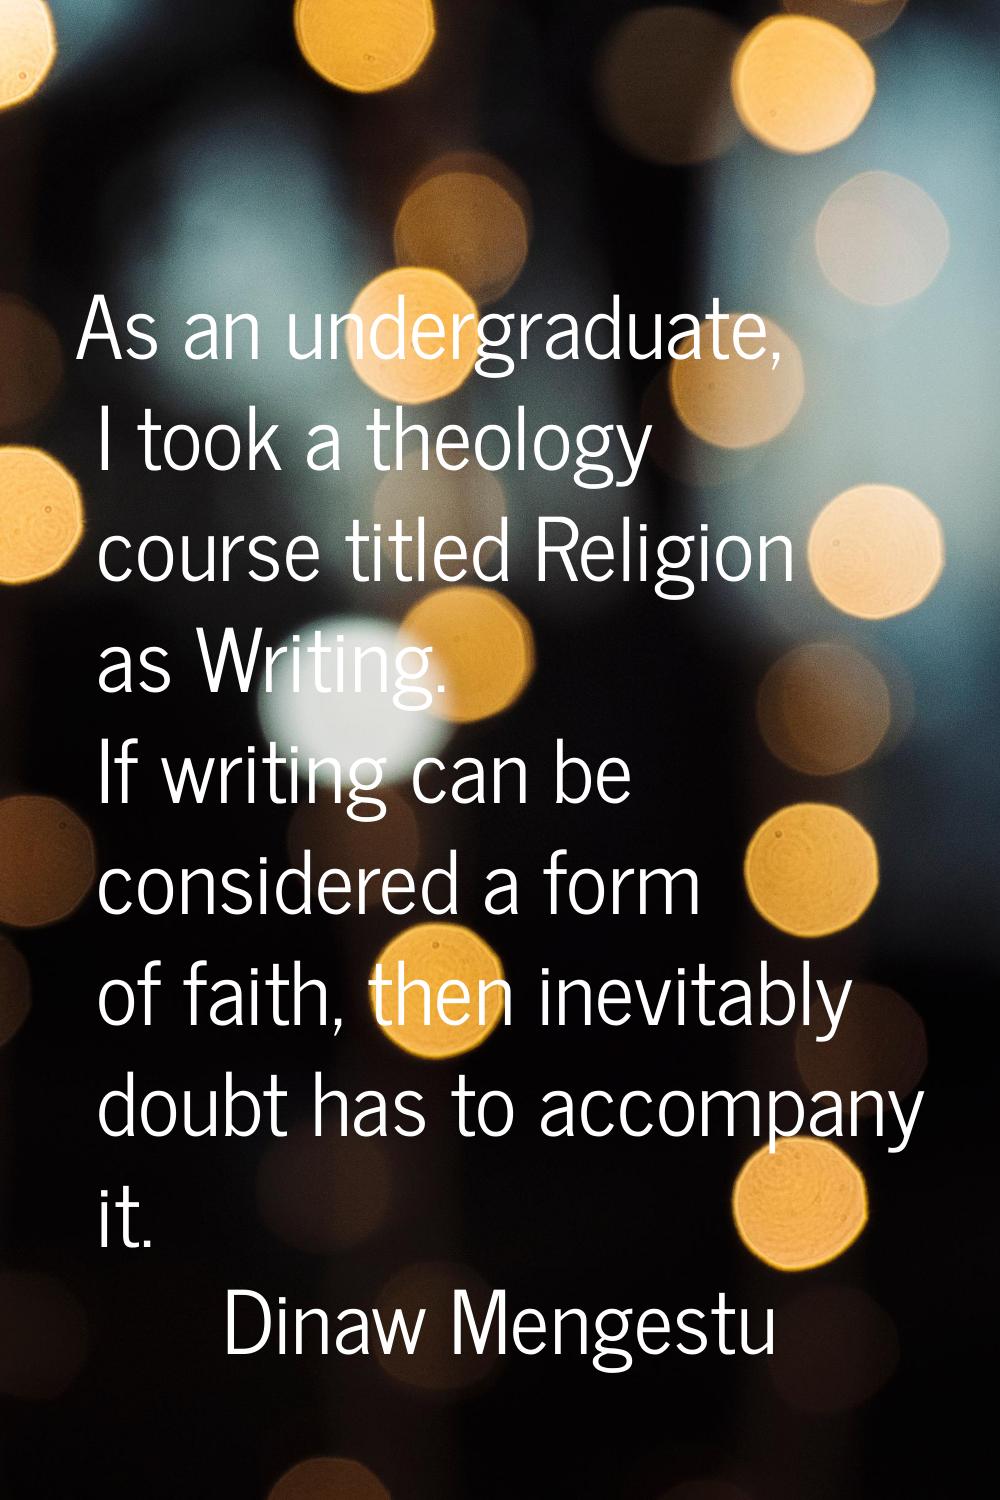 As an undergraduate, I took a theology course titled Religion as Writing. If writing can be conside